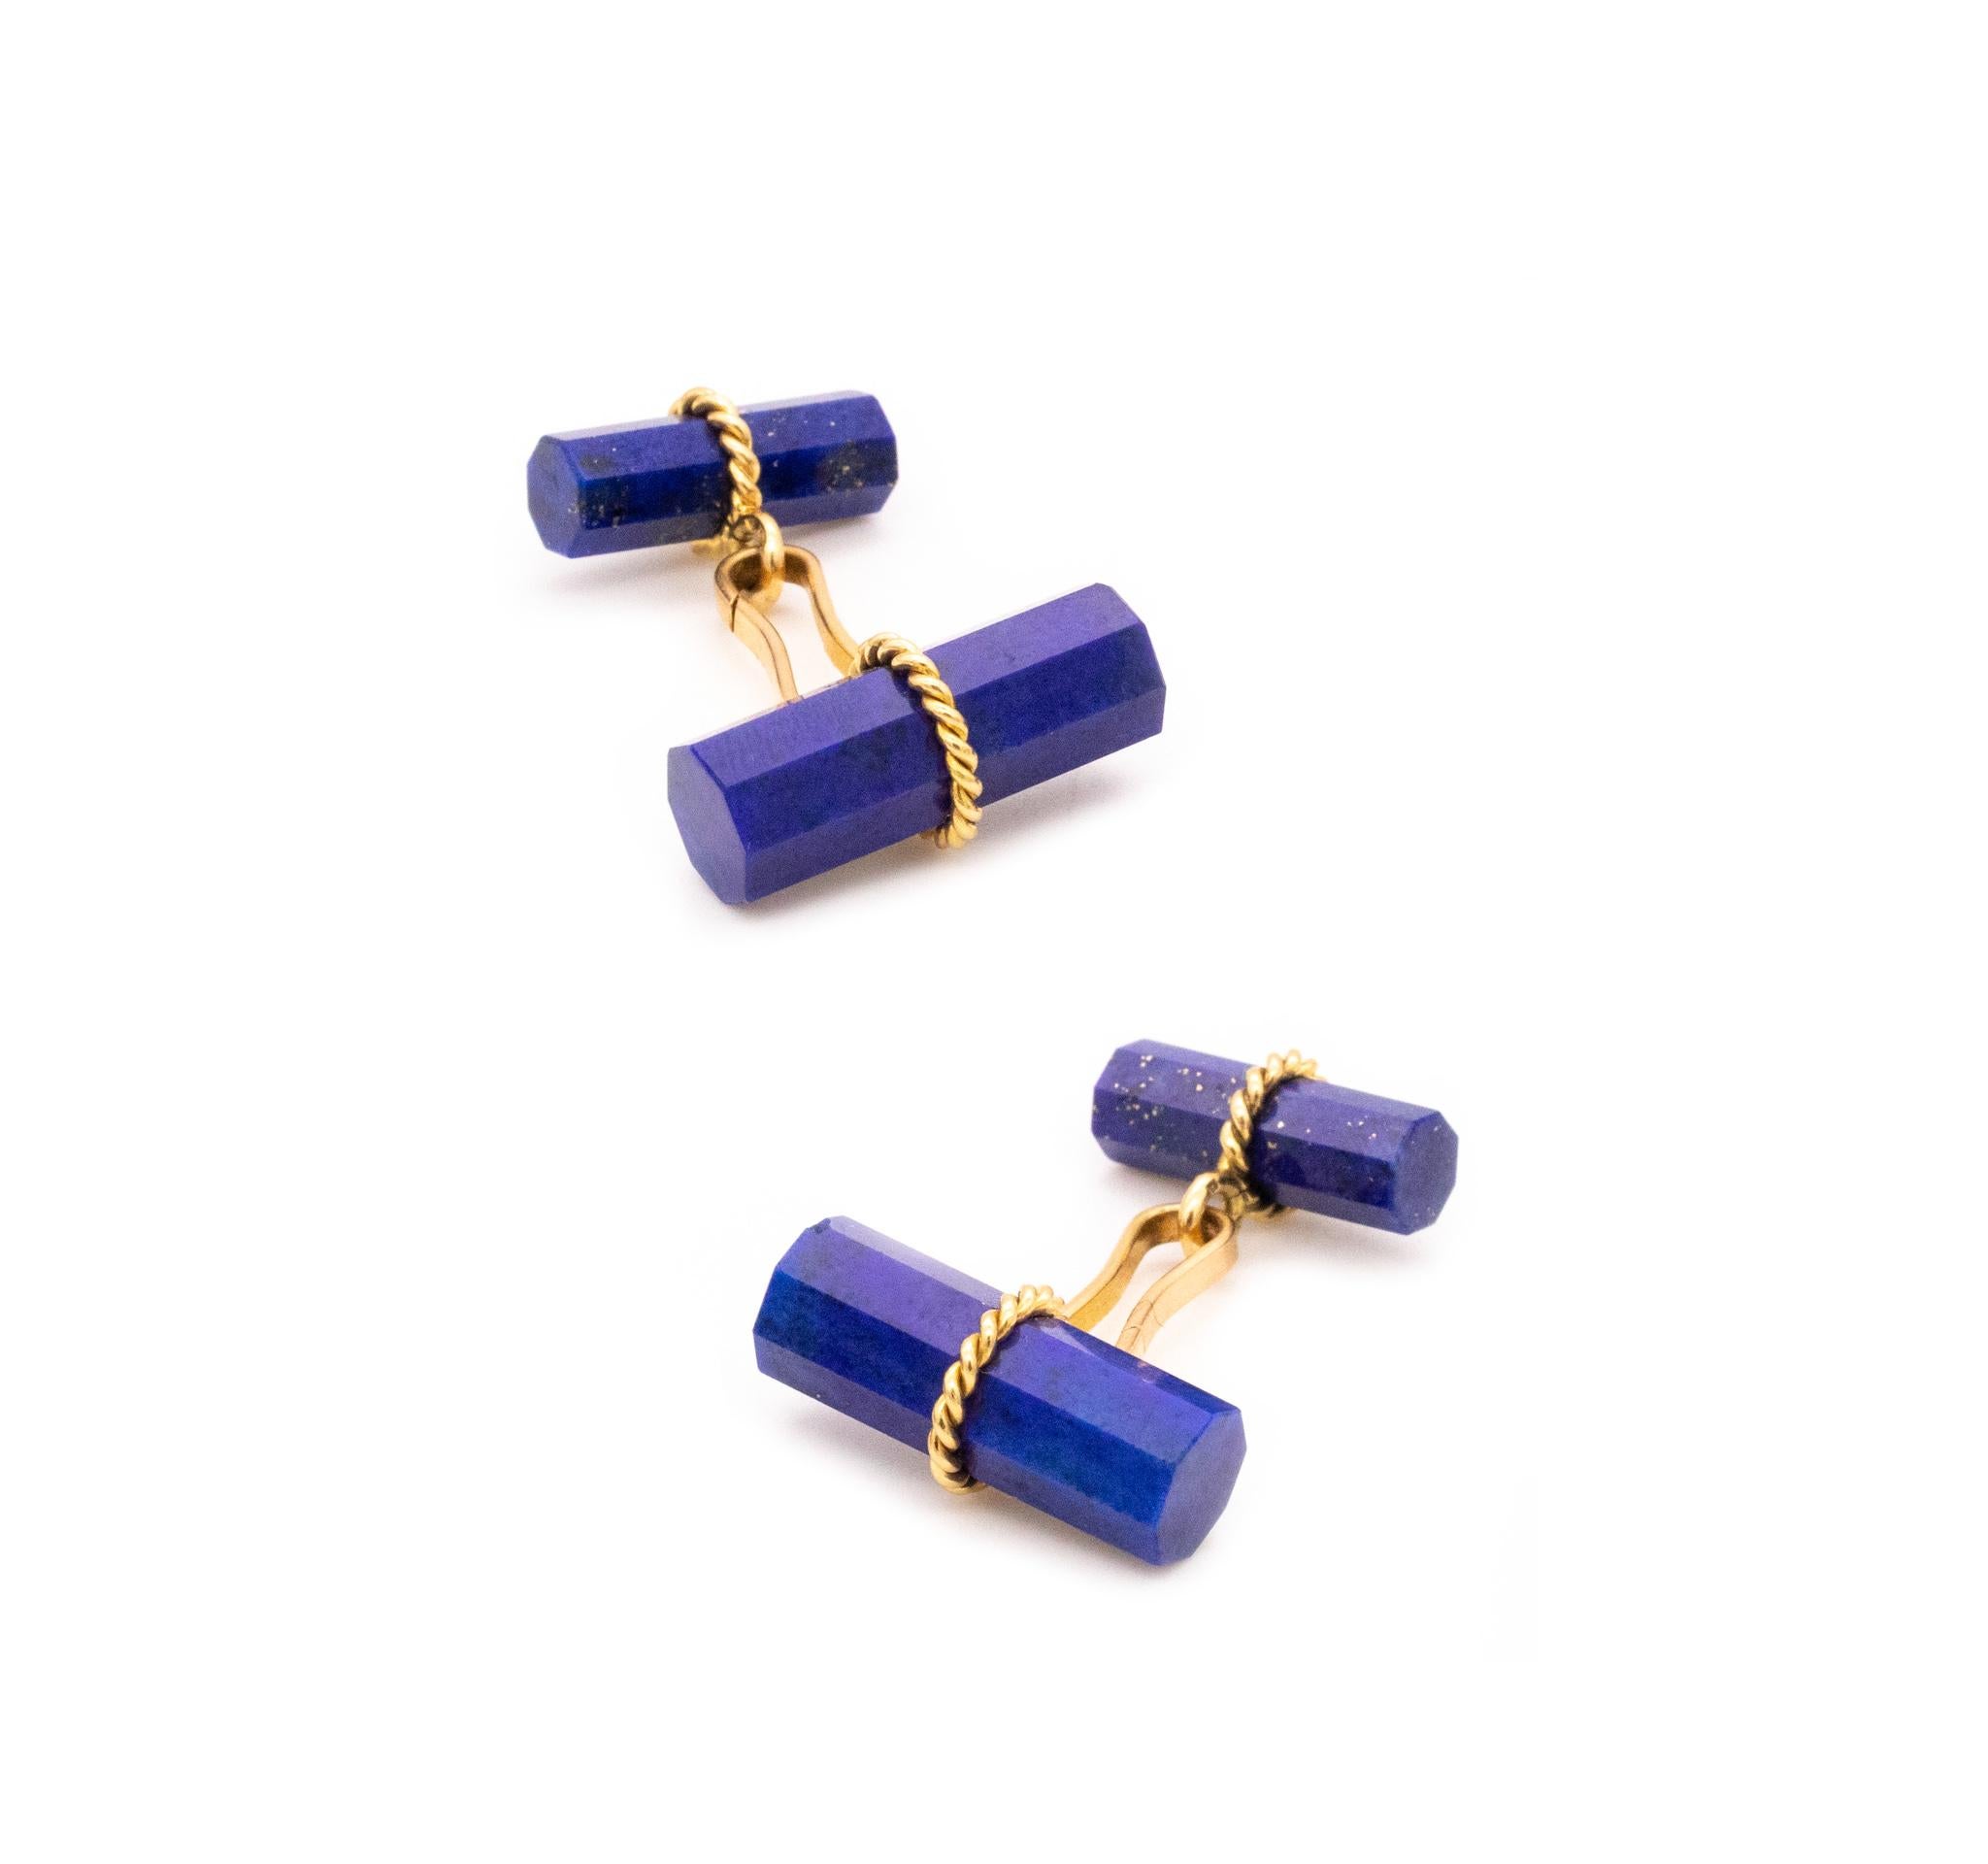 Colorful pair of cufflinks designed by Marchak Paris.

A beautiful sleek pieces created by the house of Marchak in Paris France after the war, circa 1950's. This pair of geometric cufflinks was carefully crafted with 18 karats yellow gold twisted